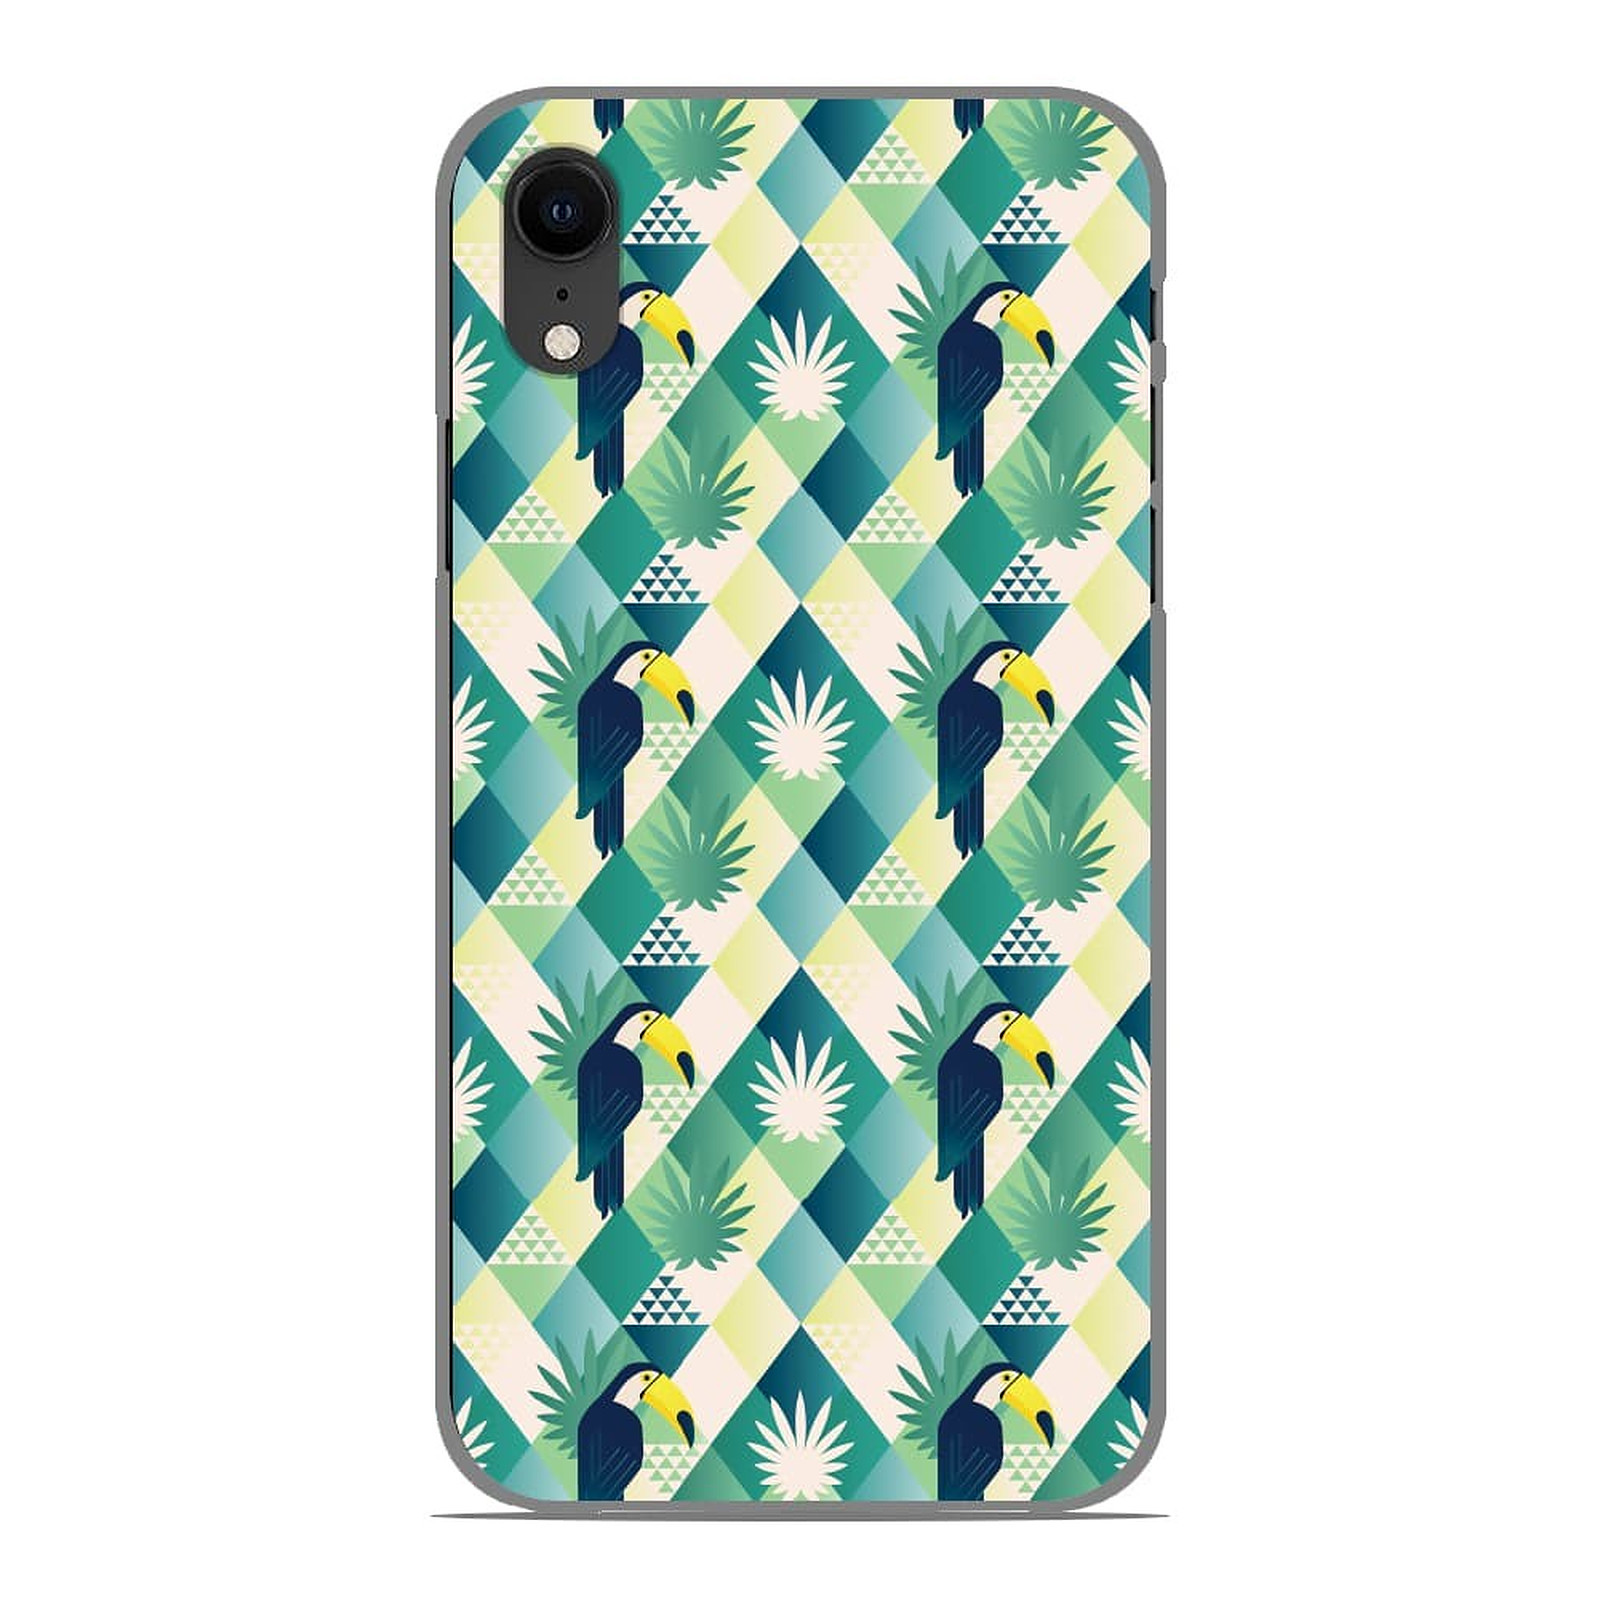 1001 Coques Coque silicone gel Apple iPhone XR motif Toucan losange - Coque telephone 1001Coques